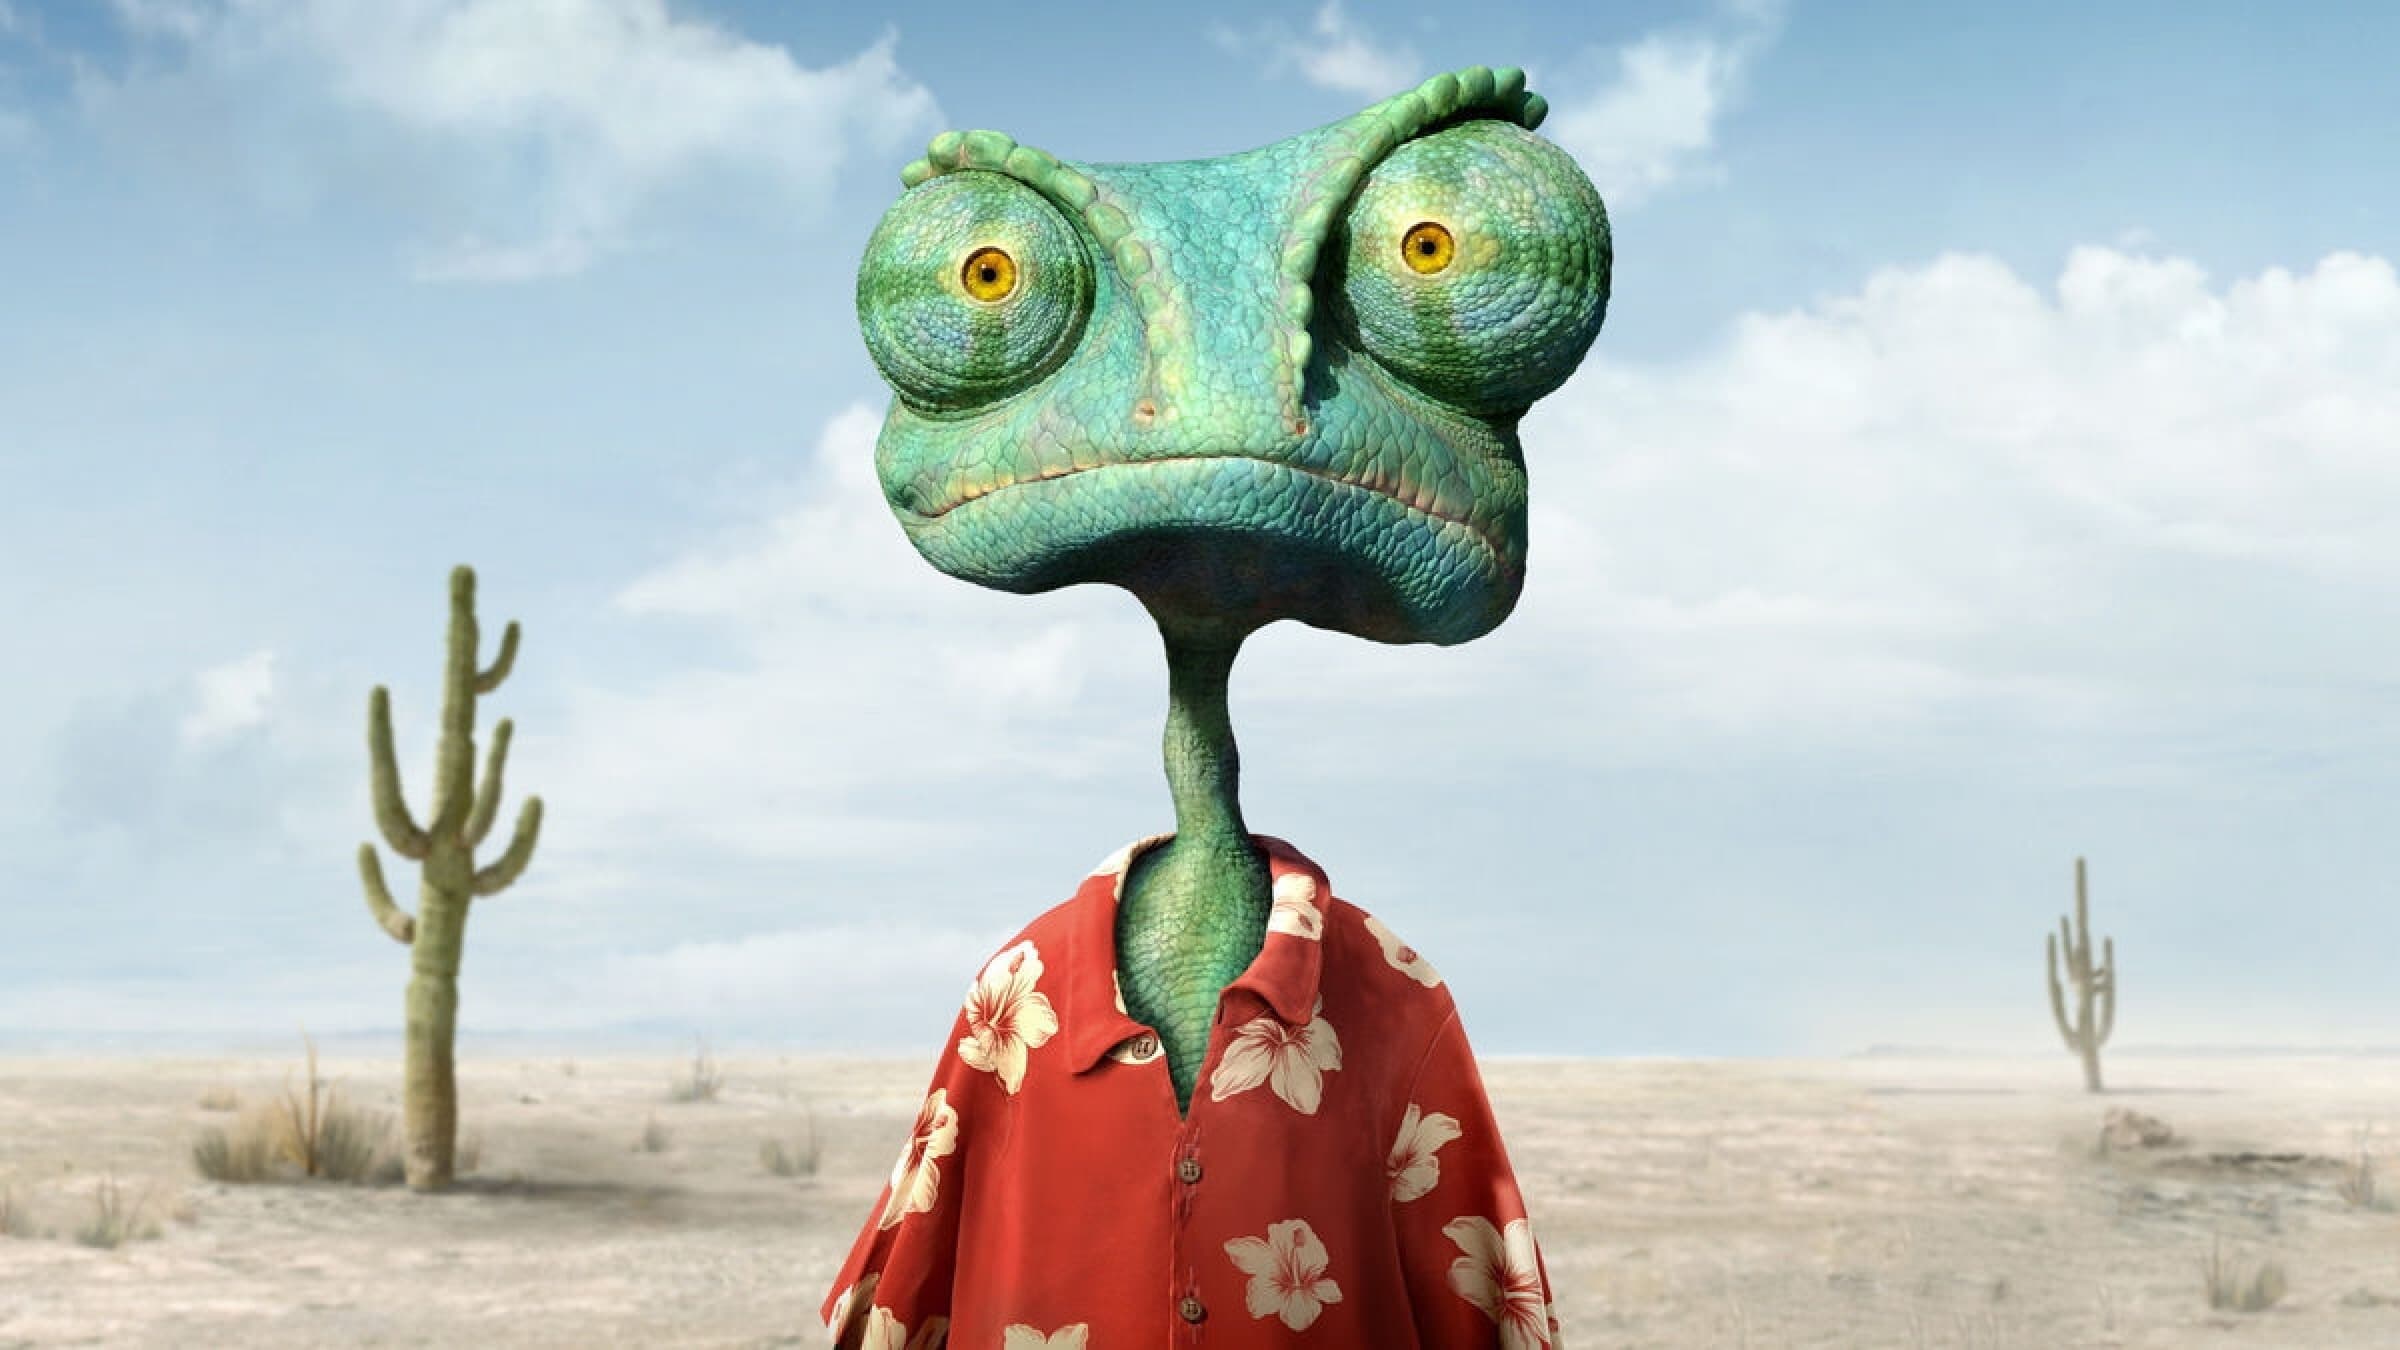 When Rango, a lost family pet, accidentally winds up in the gritty, gun-sli...